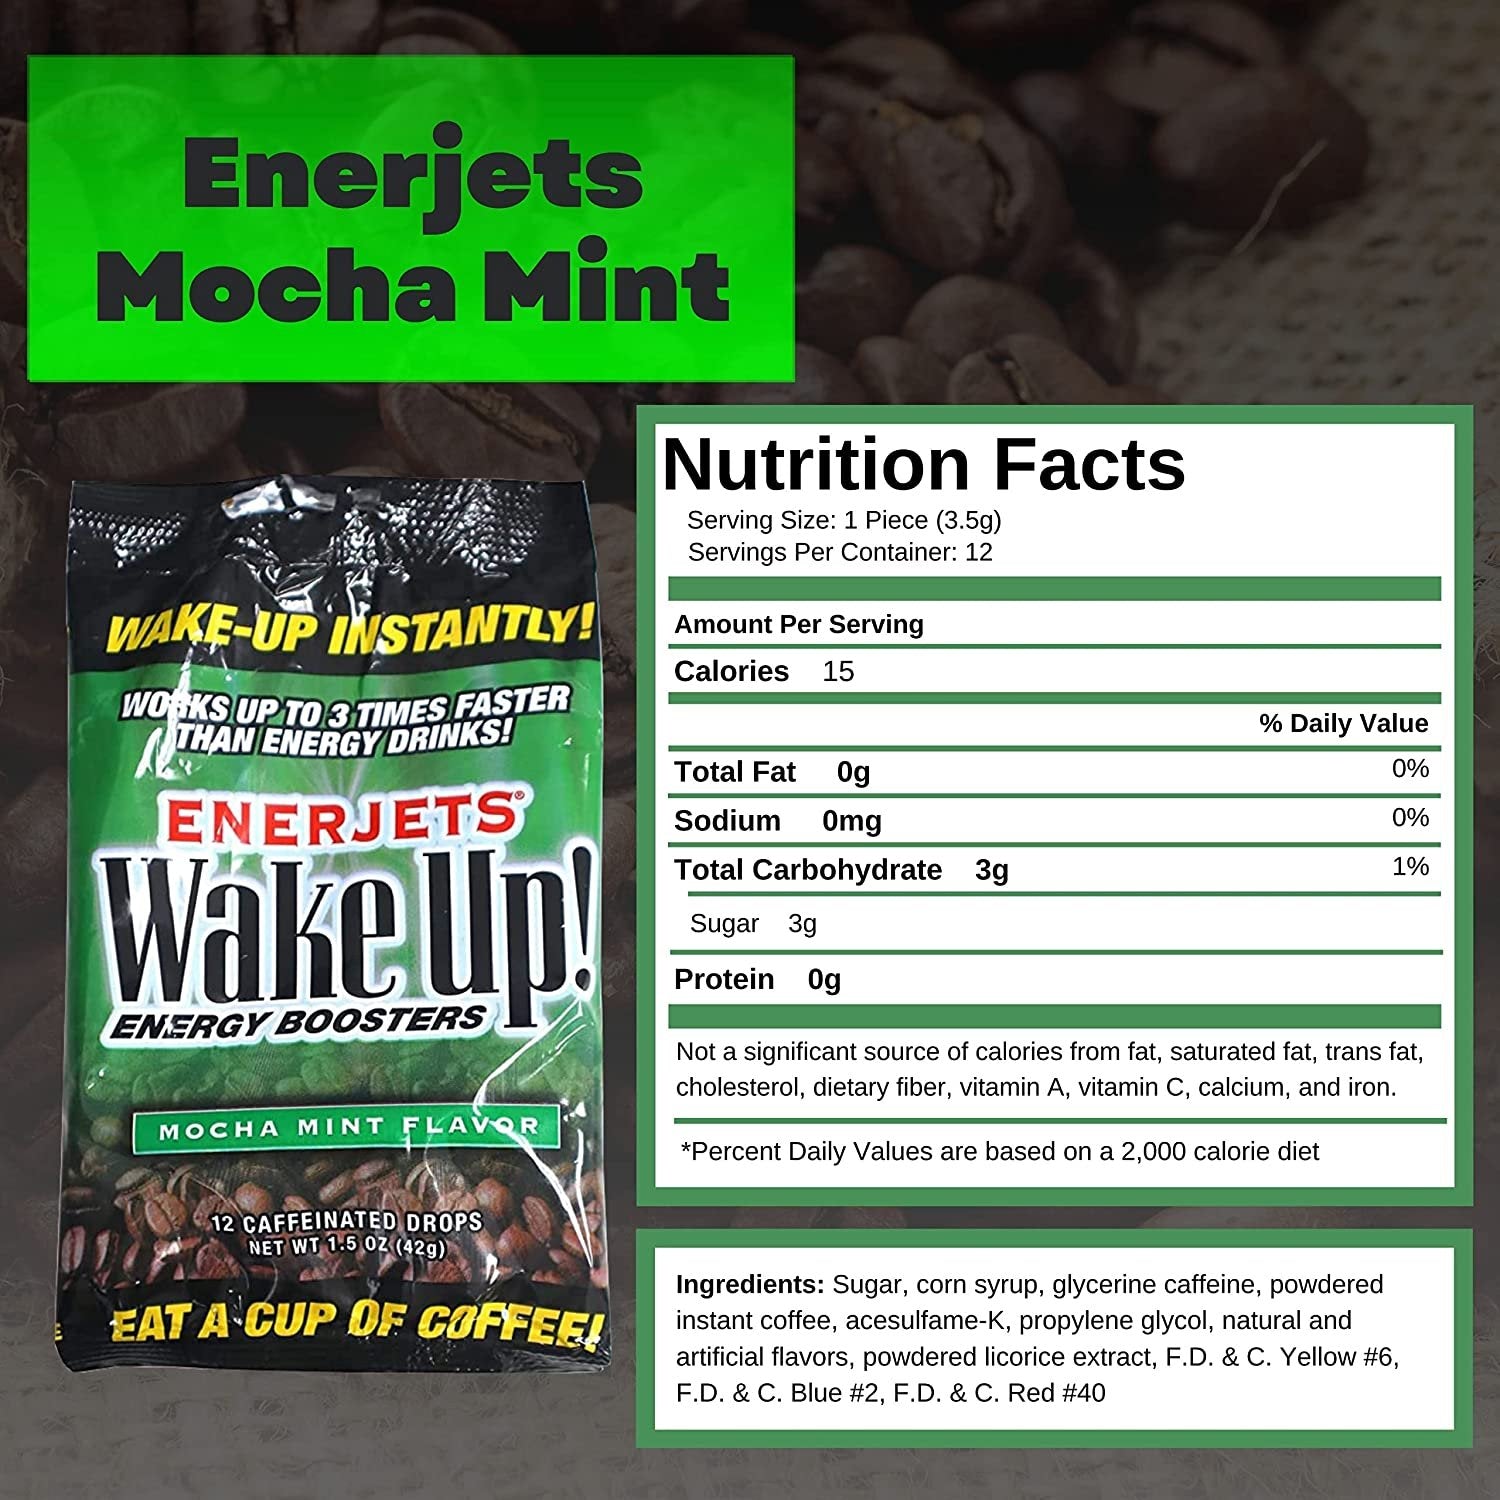 Worldwide Nutrition Enerjets Wake Up Energy Booster Caffeinated Drops - Instant Coffee Energy Supplements - Mocha Mint Flavor - Pack of 6, 12 Drops Per Package with Worldwide Multi Purpose Key Chain